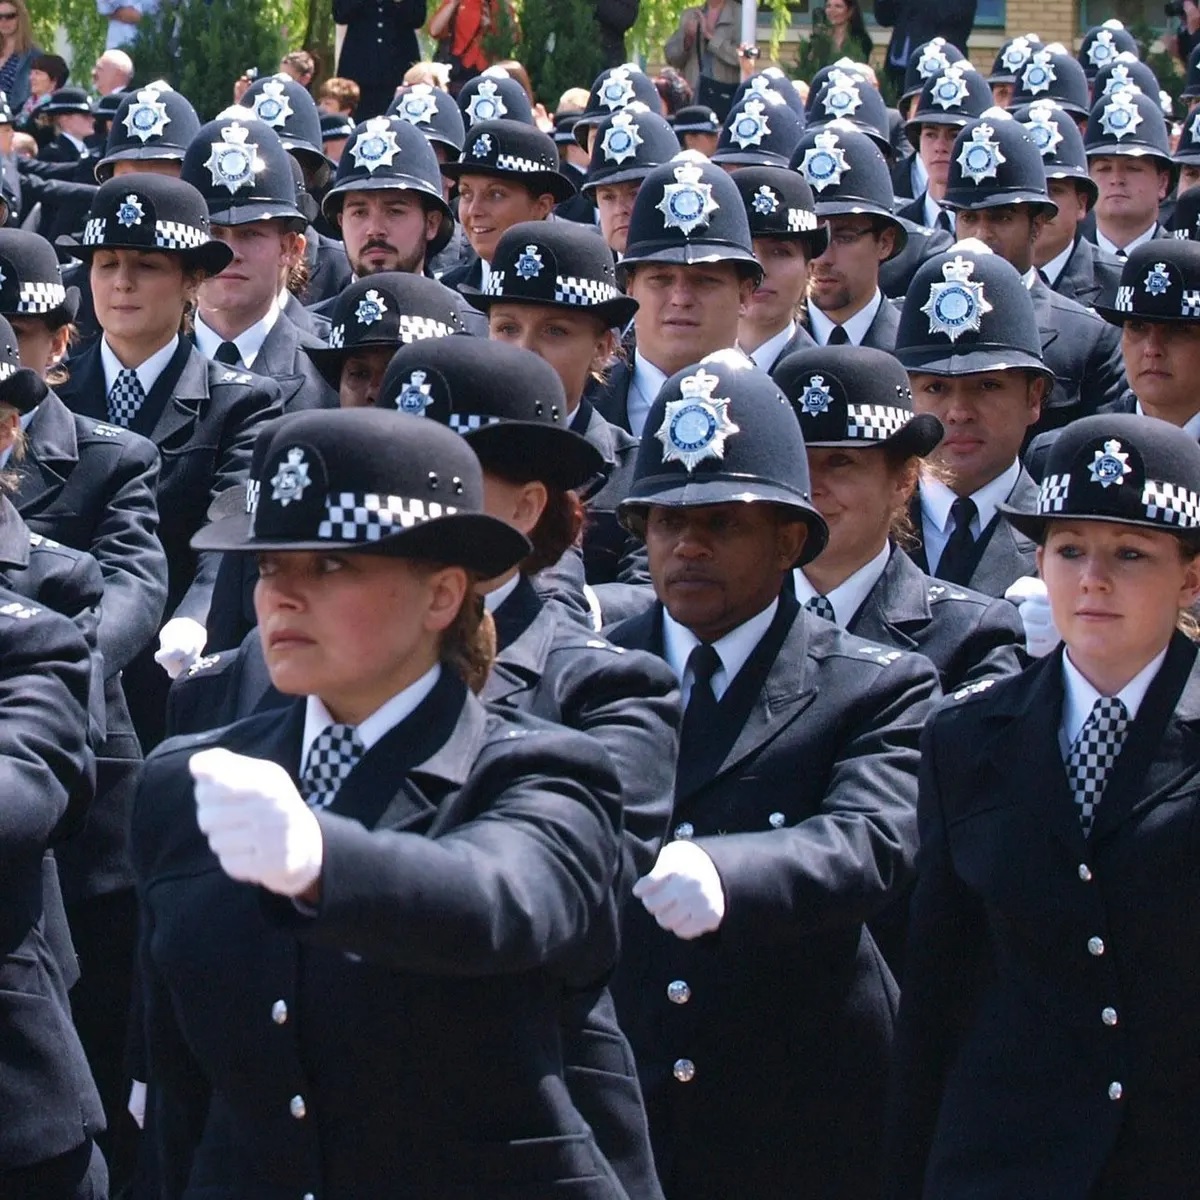 Sexism, the police and abolition • International Socialism